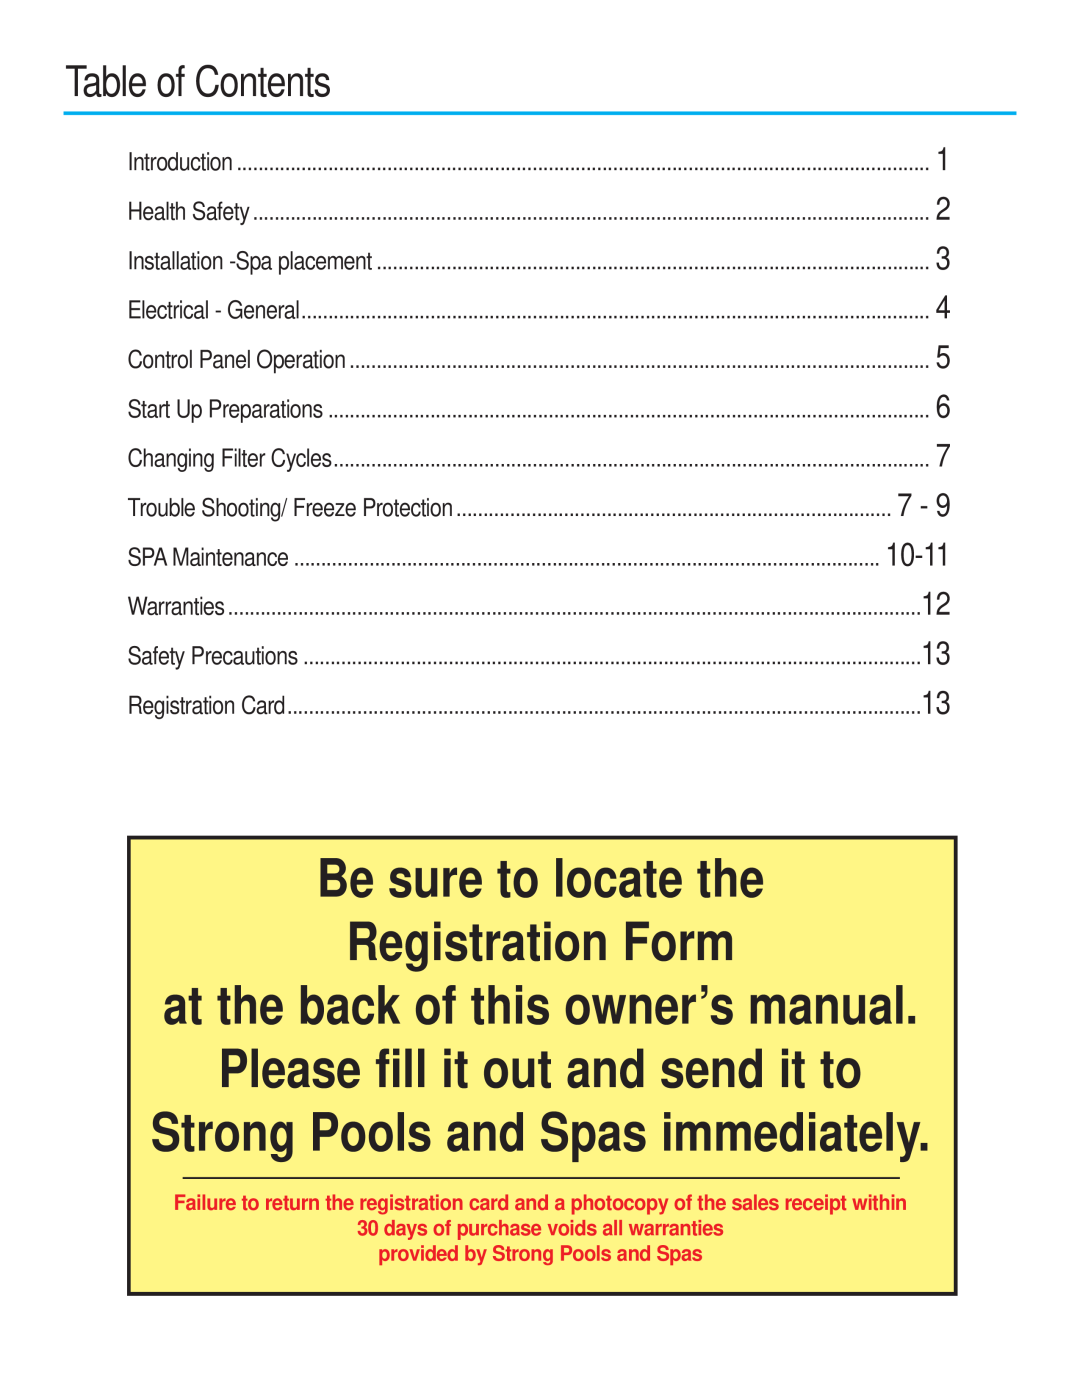 Strong Pools and Spas Patriot Spa owner manual Table of Contents, Be sure to locate the Registration Form 